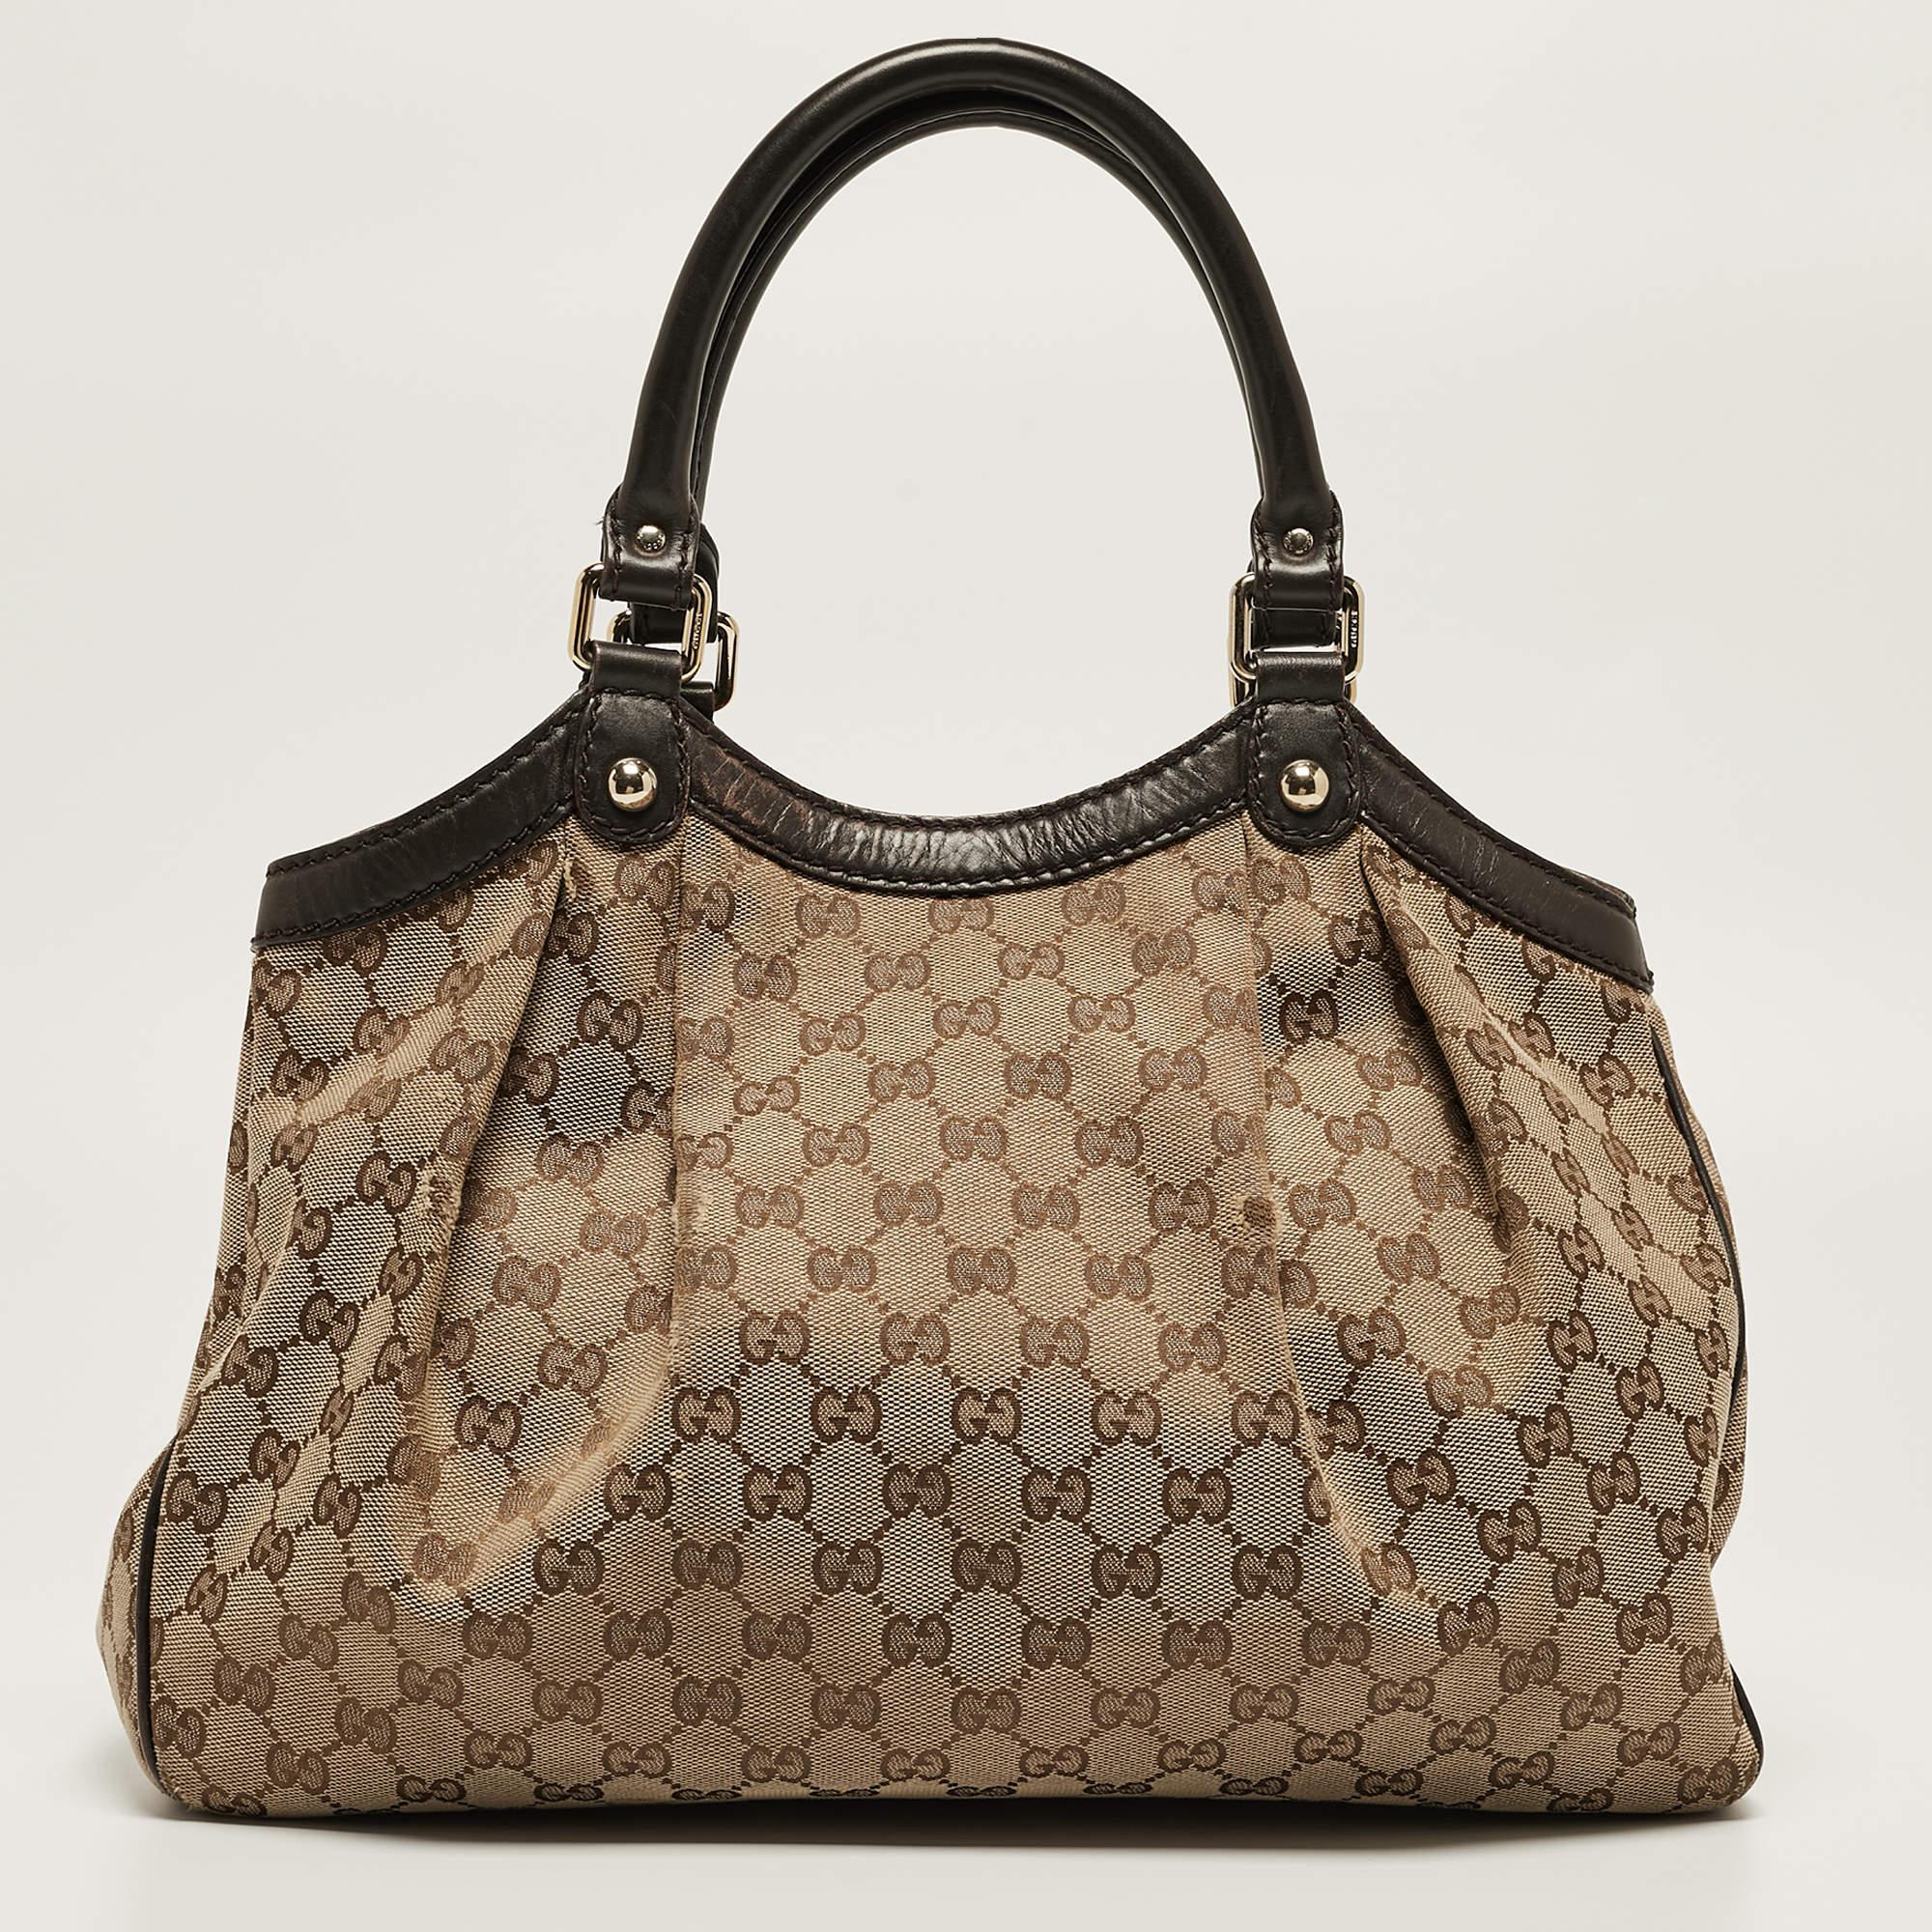 The Sukey is one of the best-selling designs from Gucci, and we believe you deserve to have one too. Crafted from GG canvas & leather and equipped with a spacious interior, this bag will work perfectly with any outfit. It is complete with two